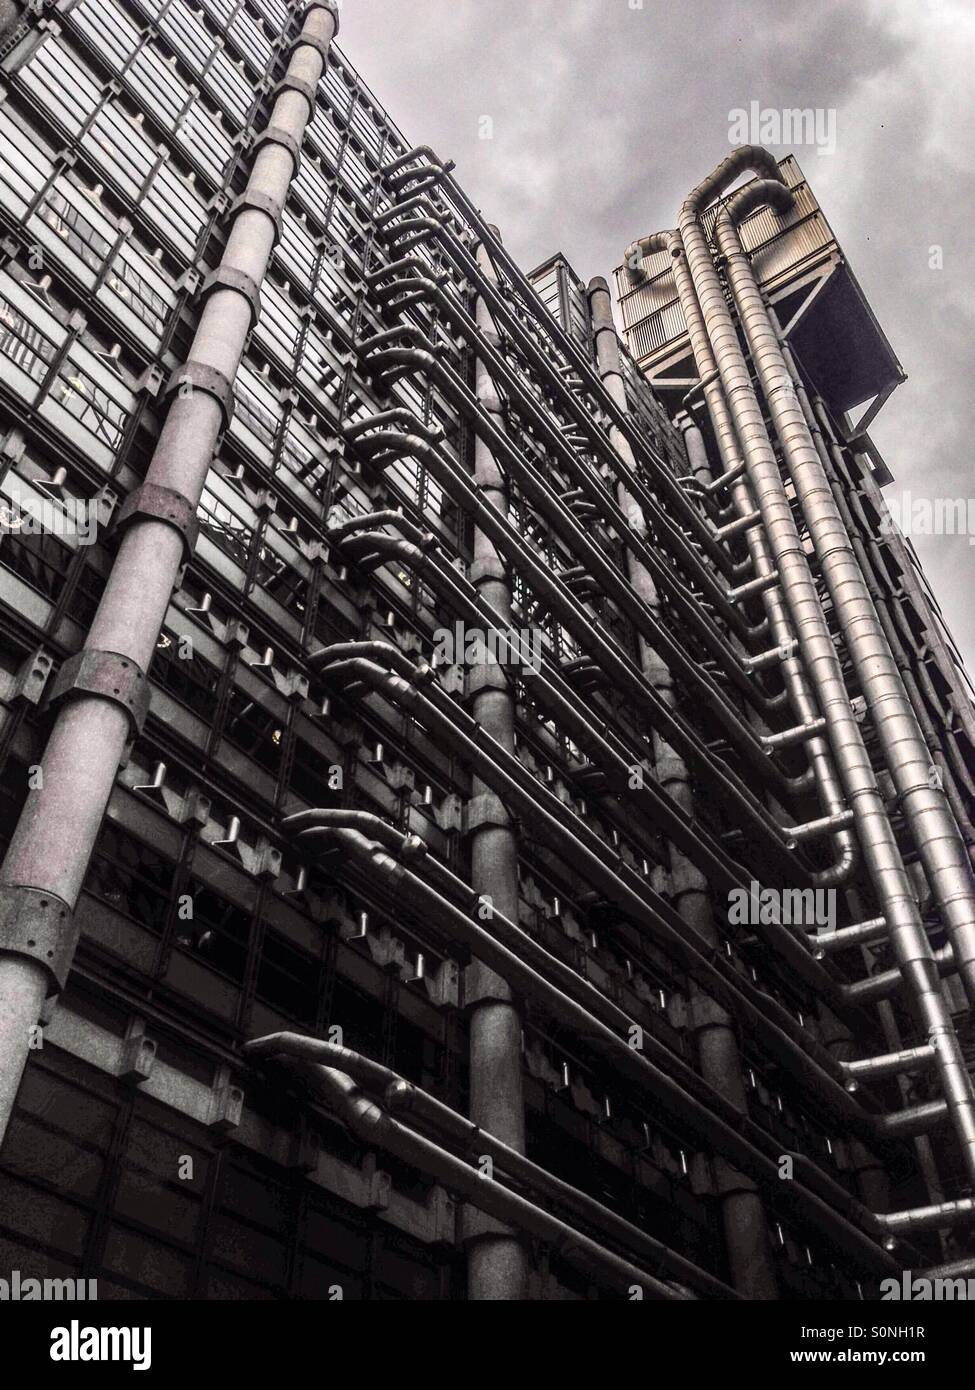 The Lloyds building, sometimes known as the inside out building is home of the insurance institution Lloyds of London. It is located on the former site of East India House in Lime Street, London. Stock Photo